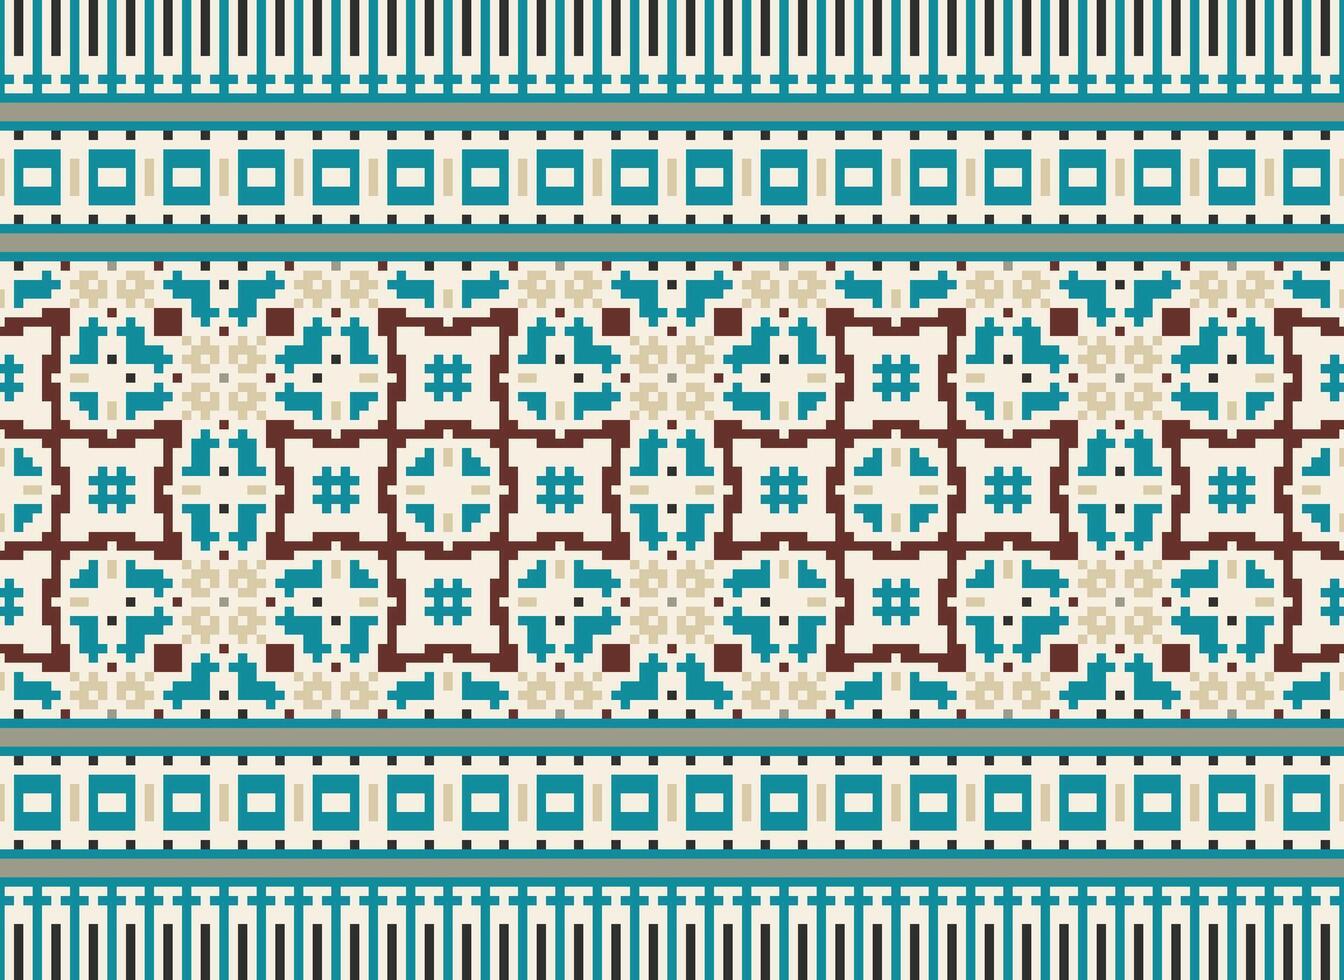 Geometric patterns of modern stylish texture. Borders in the form of a pixel ornament for embroidery, ceramic tiles and textile interior design elements. Seamless illustration vector